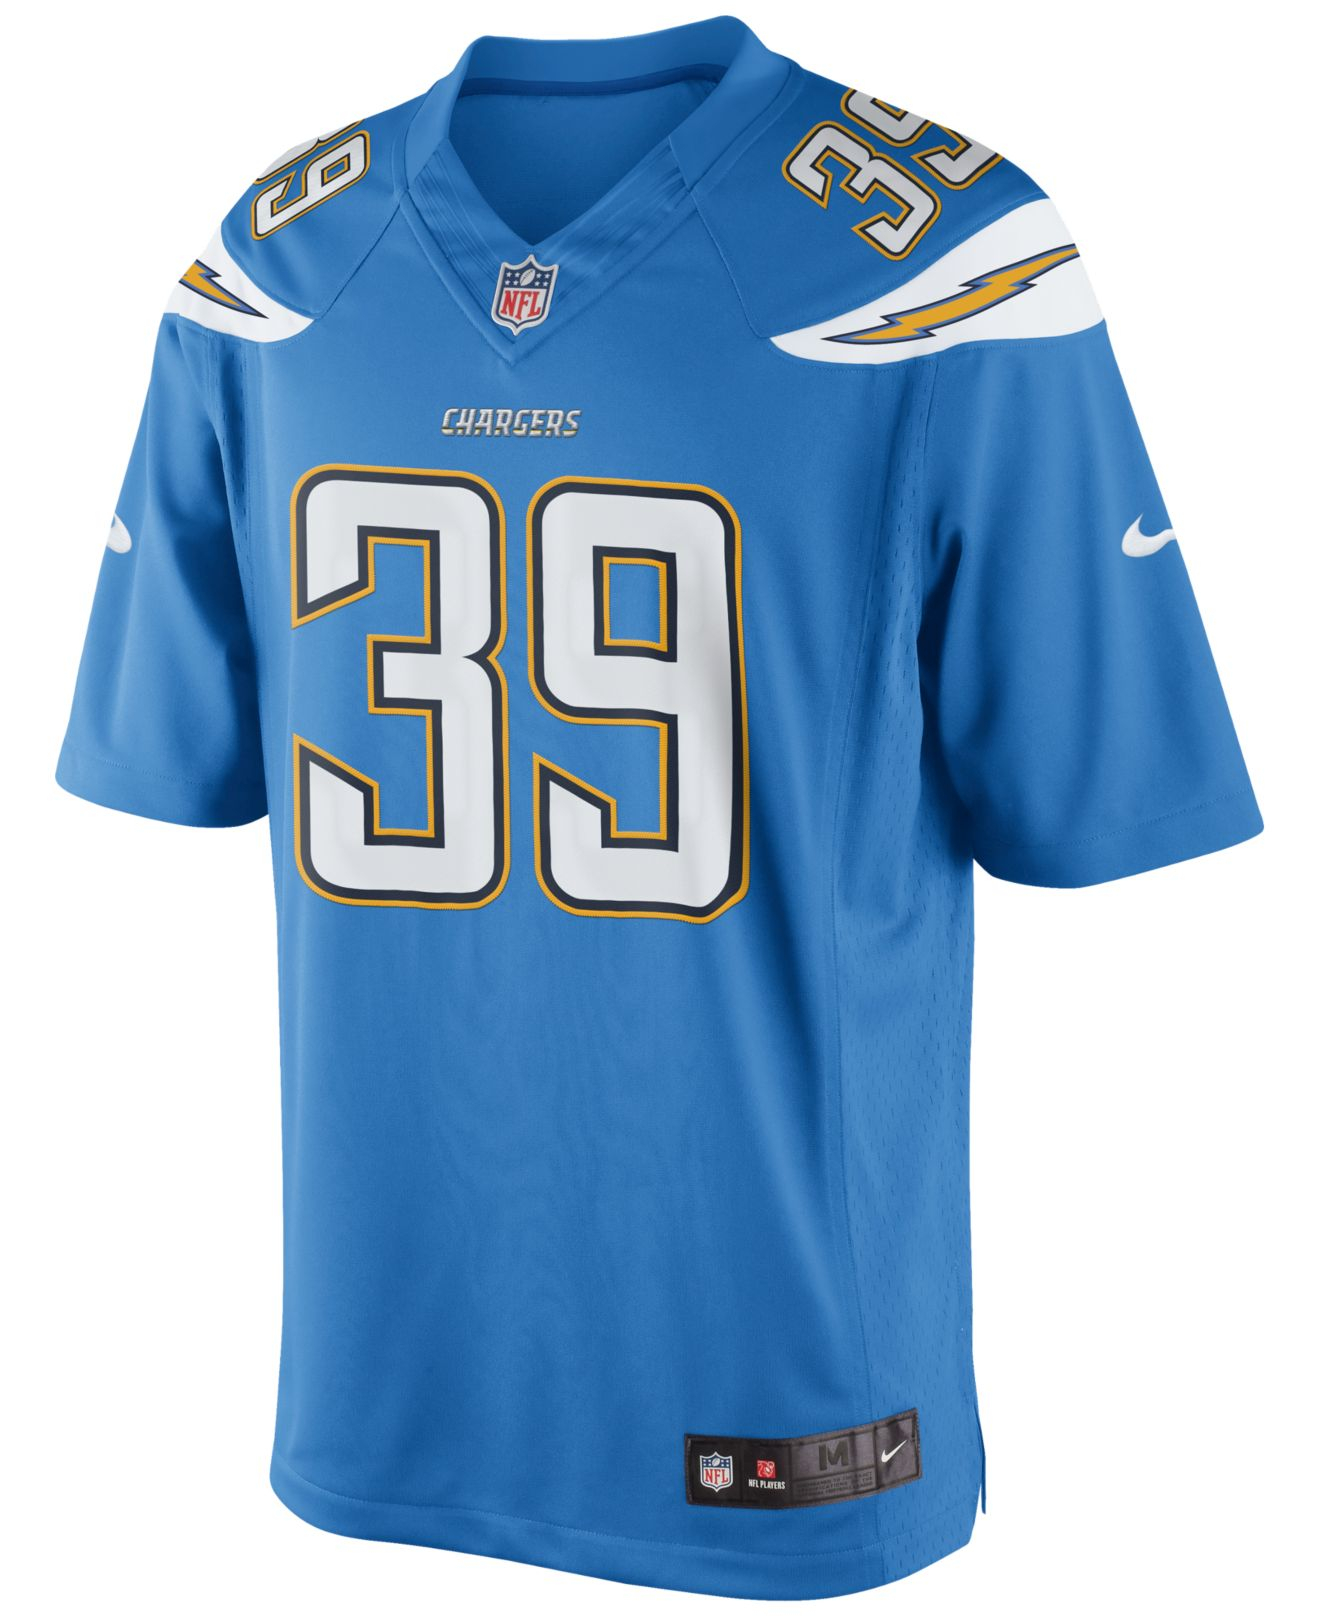 Lyst - Nike Men's Danny Woodhead San Diego Chargers Limited Jersey in ...